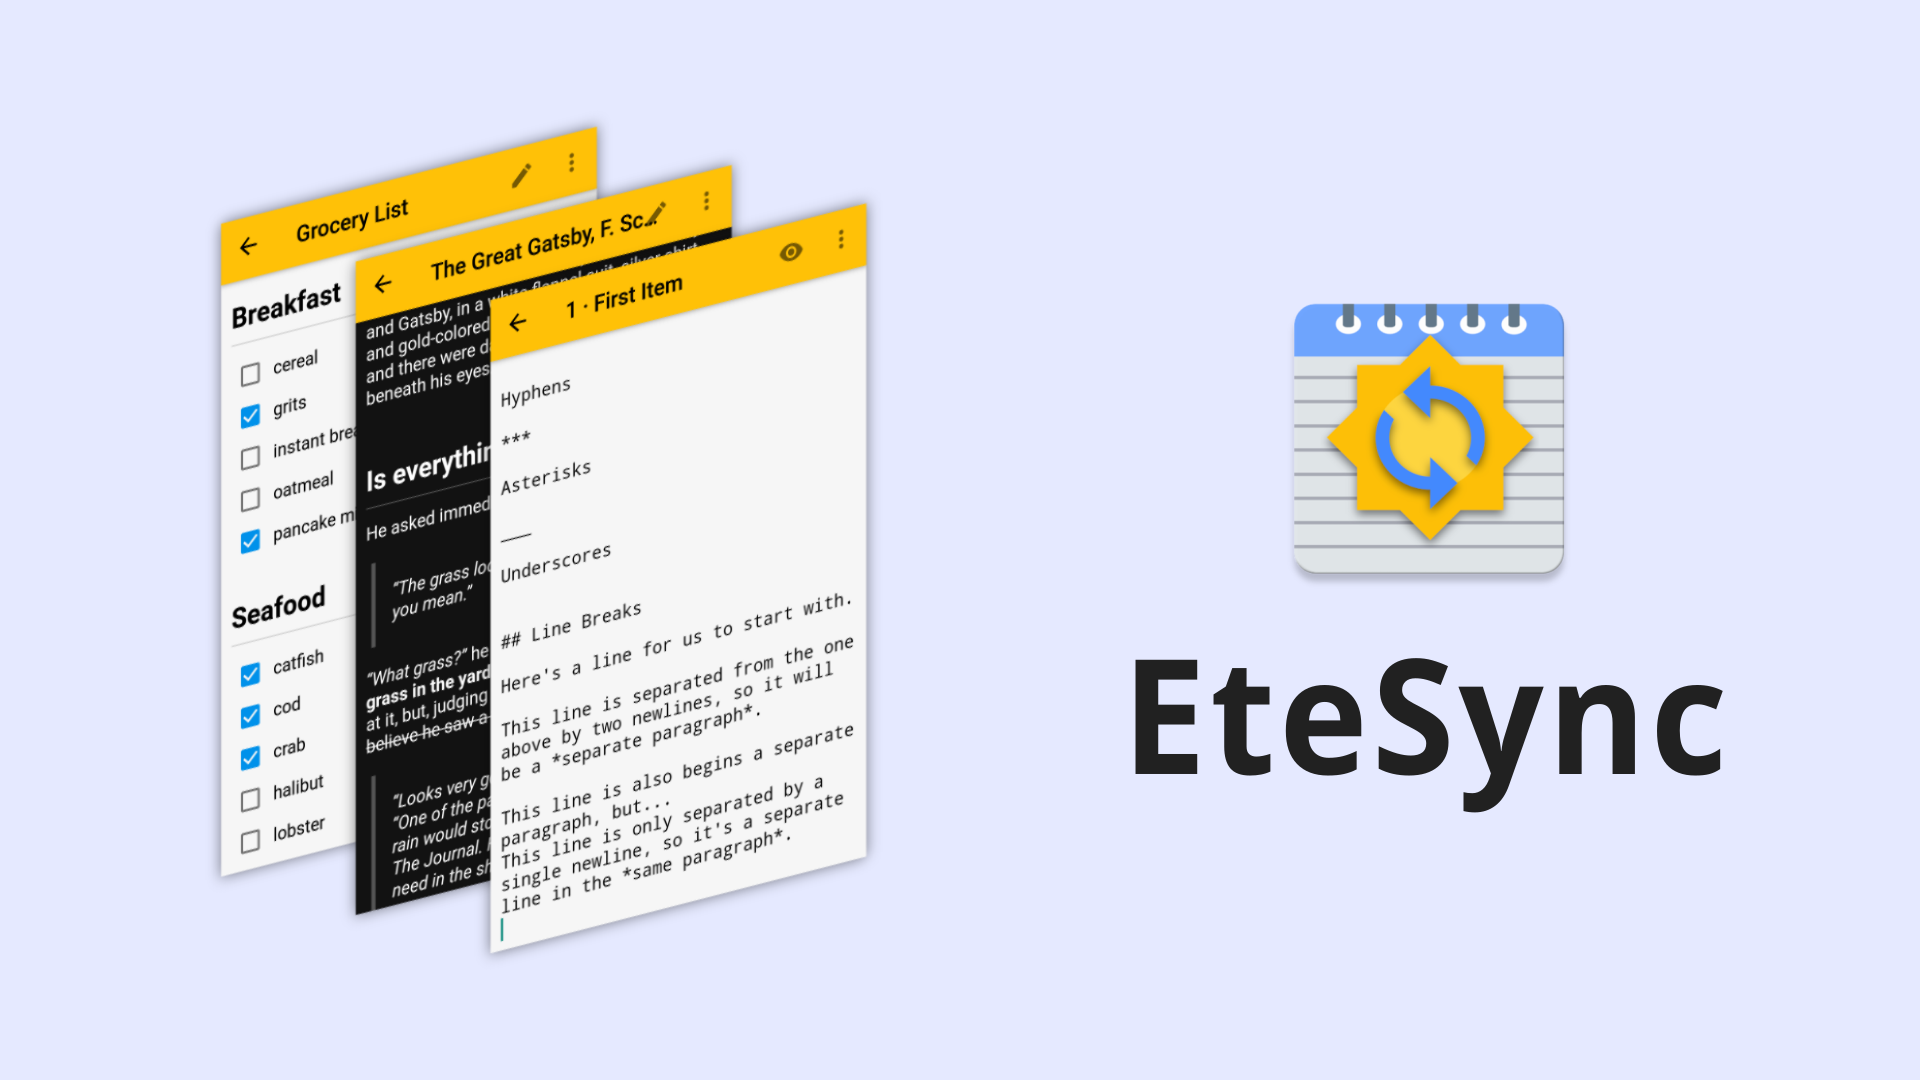 Guest Post: Improving EteSync Notes